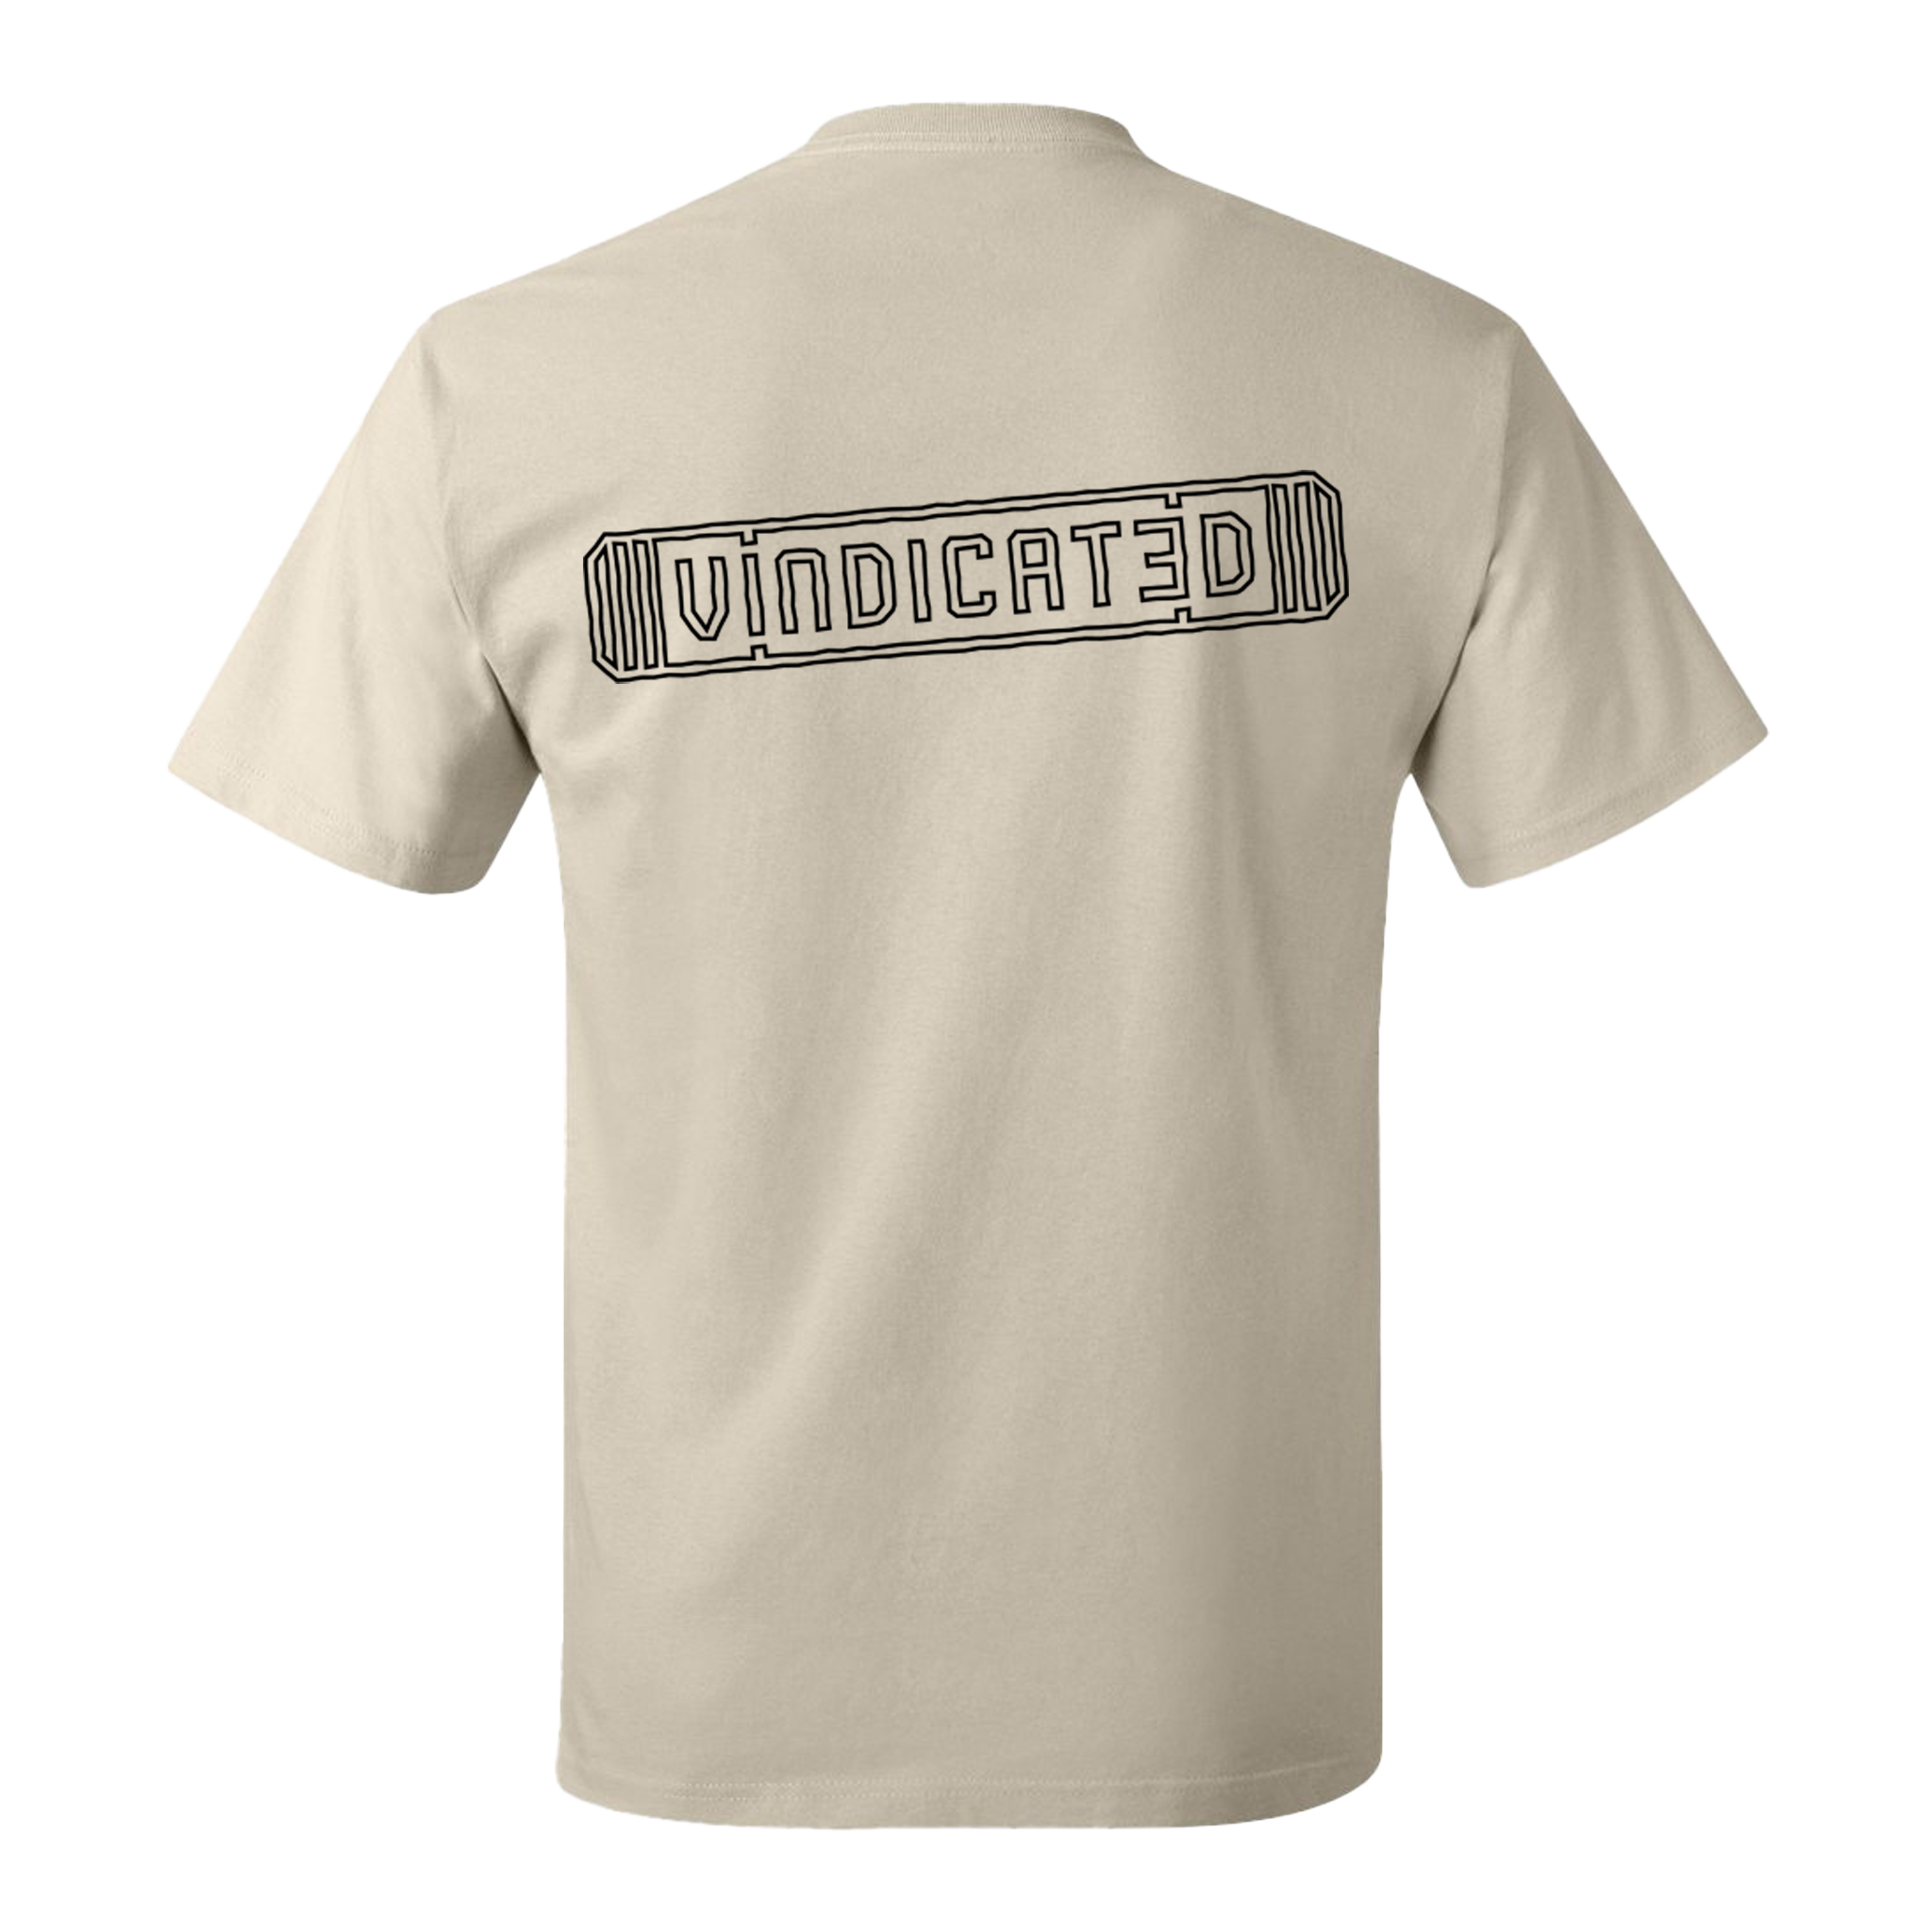 Backside of the off white Vindicated tee shirt with "Vindicated" in black across the middle of the back inside a skateboard